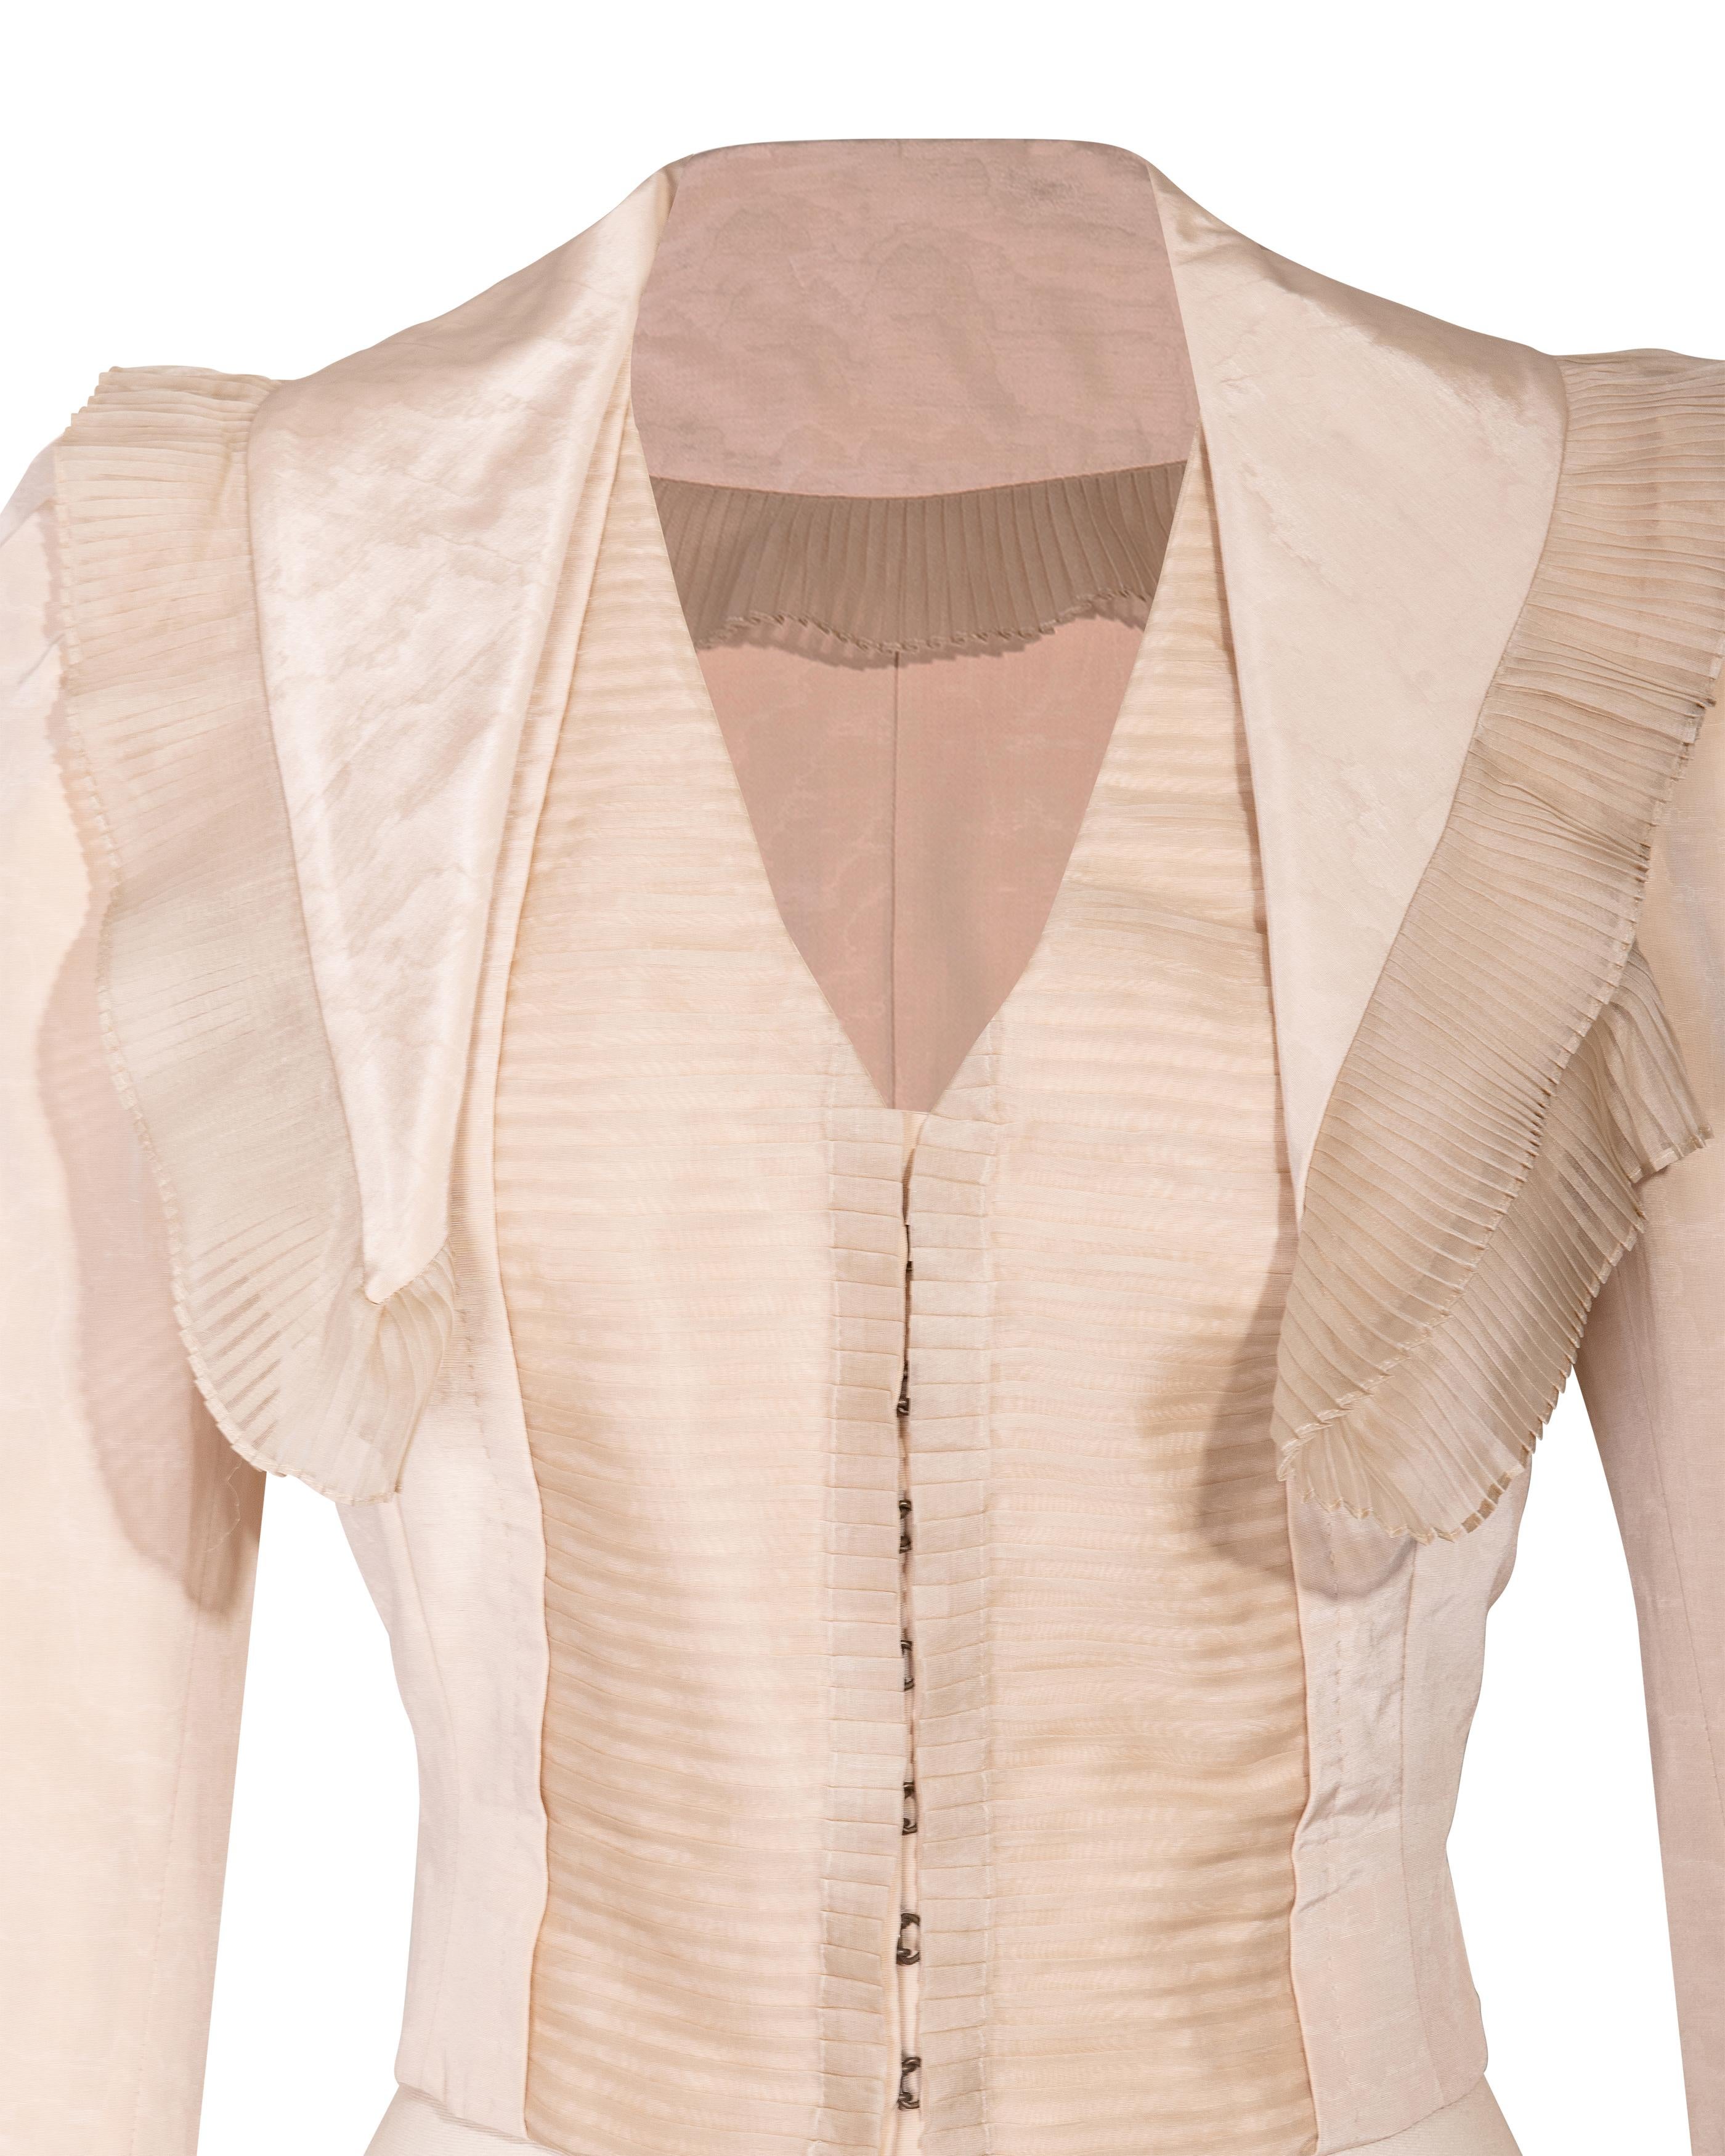 S/S 2007 Alexander McQueen Tan Evening Jacket with Pleated Ruffle Details 2